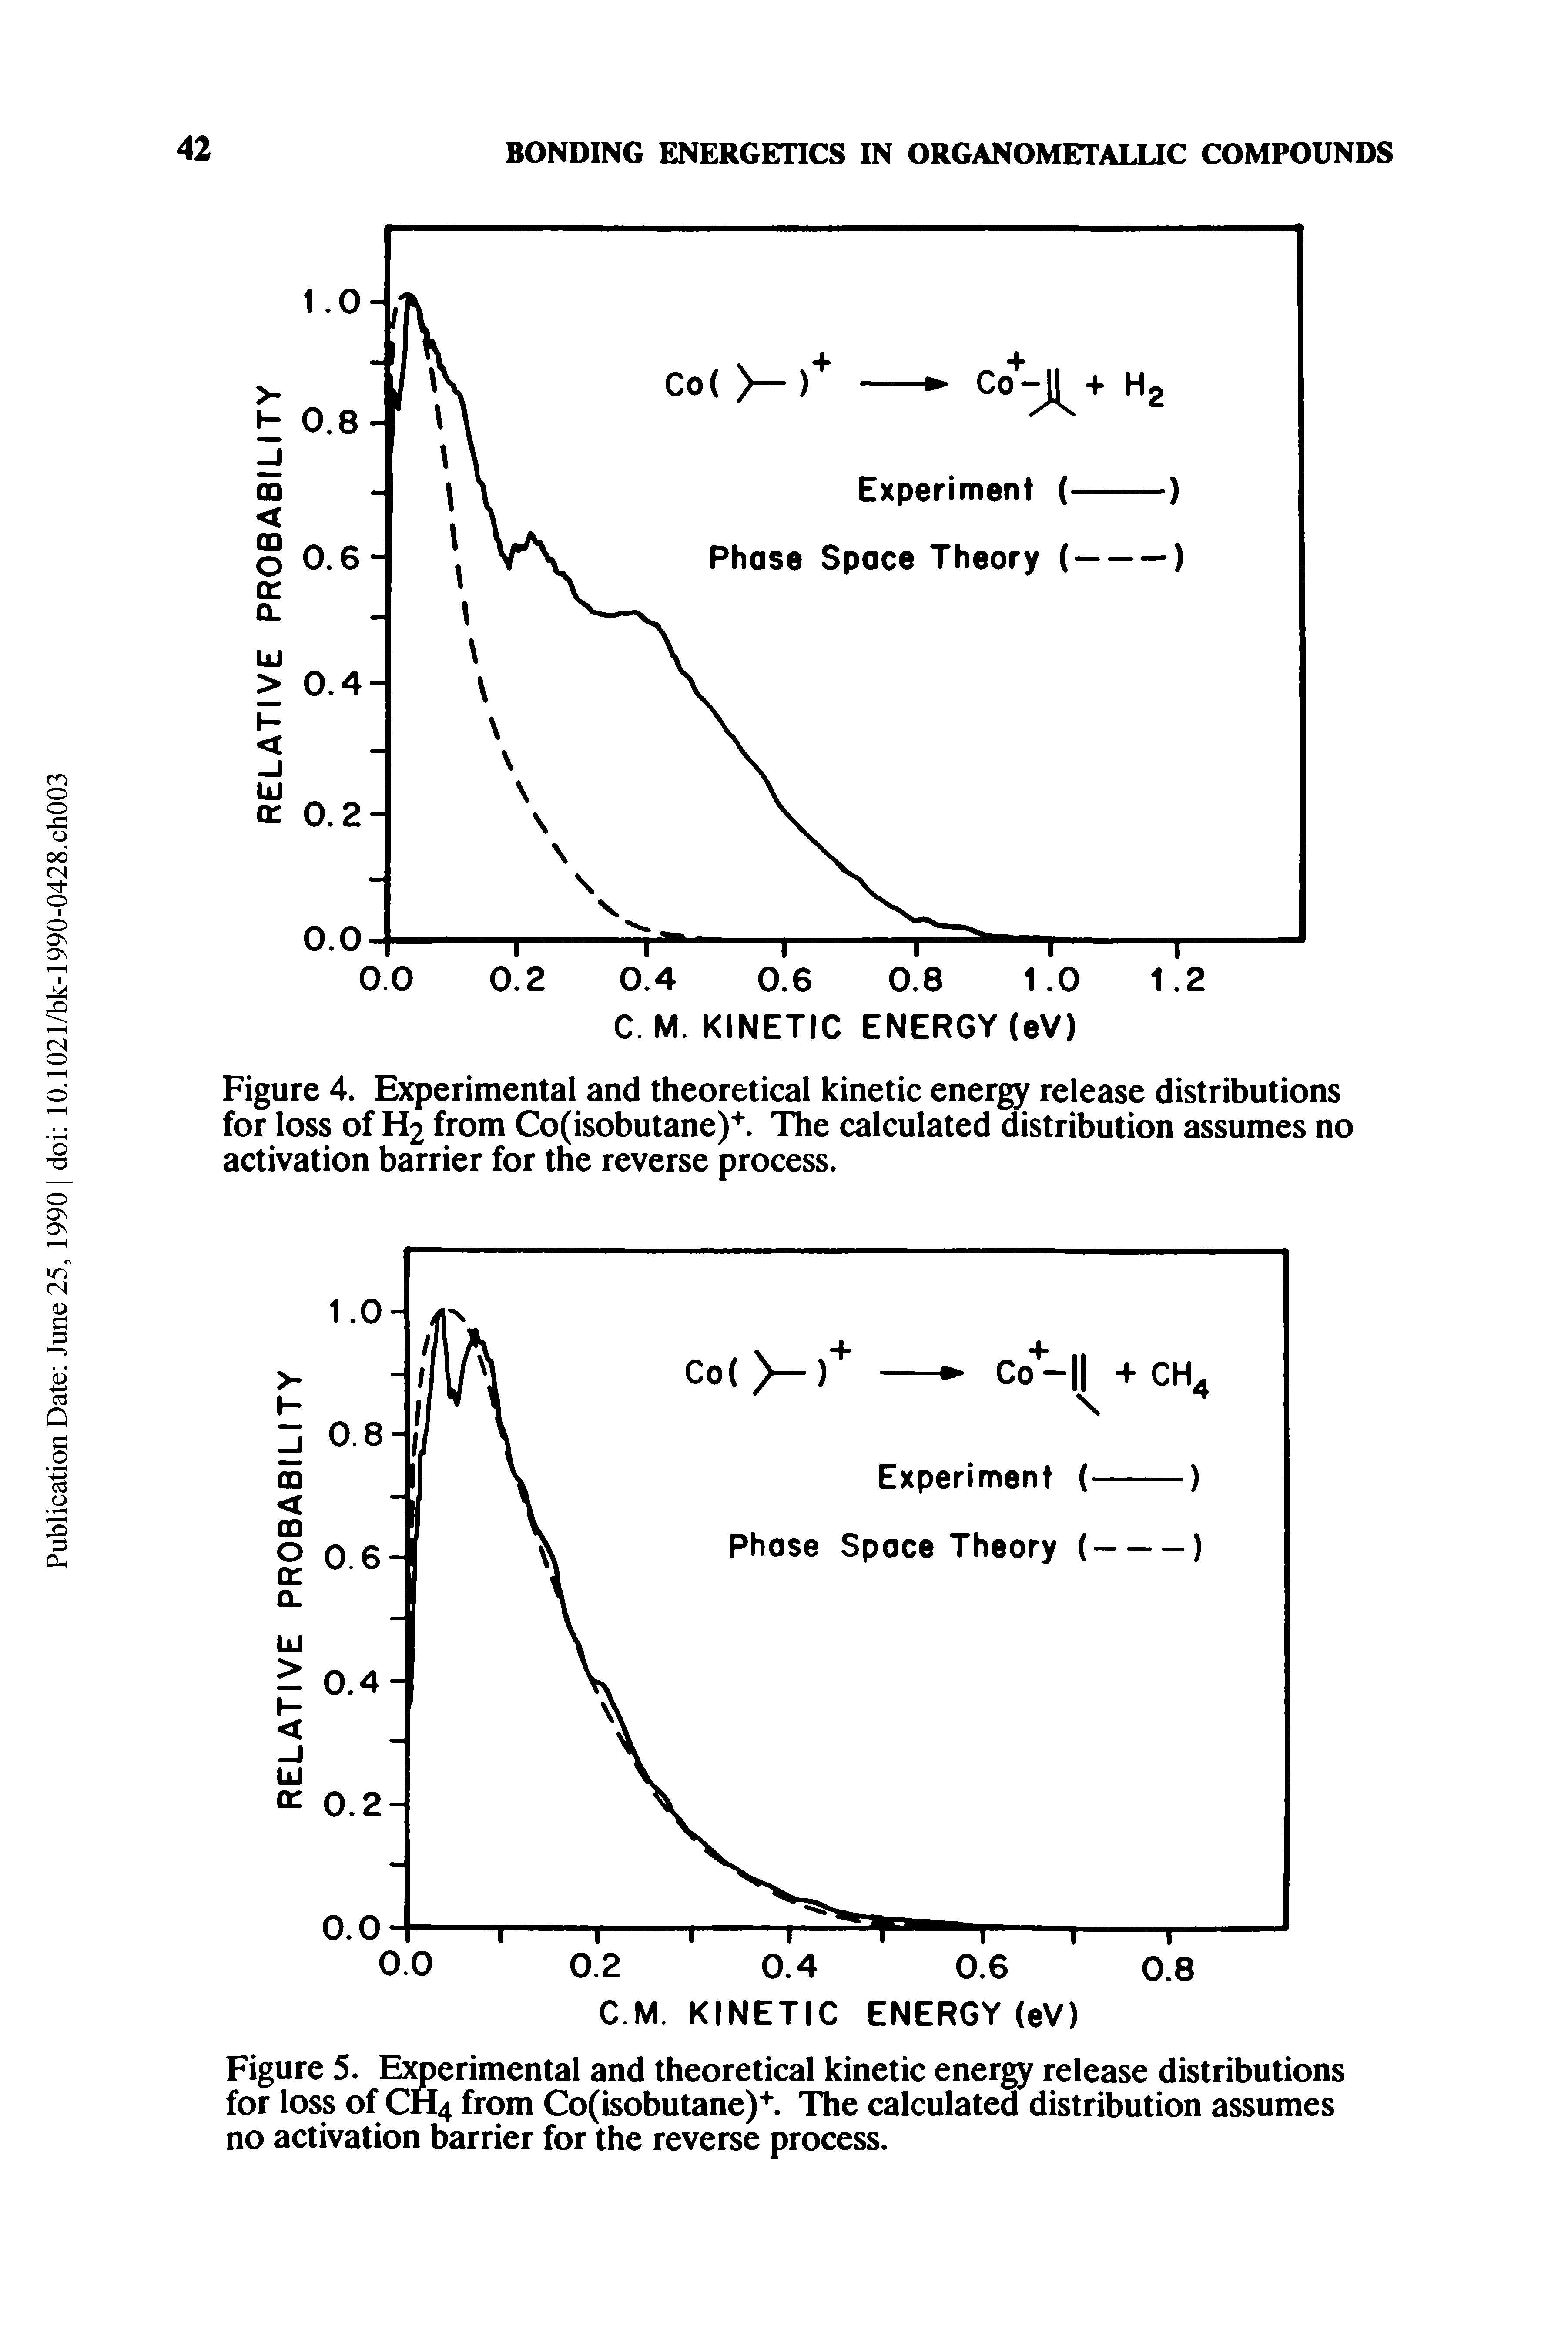 Figure 4. Experimental and theoretical kinetic energy release distributions for loss of H2 from Co(isobutane). The calculated distribution assumes no activation barrier for the reverse process.